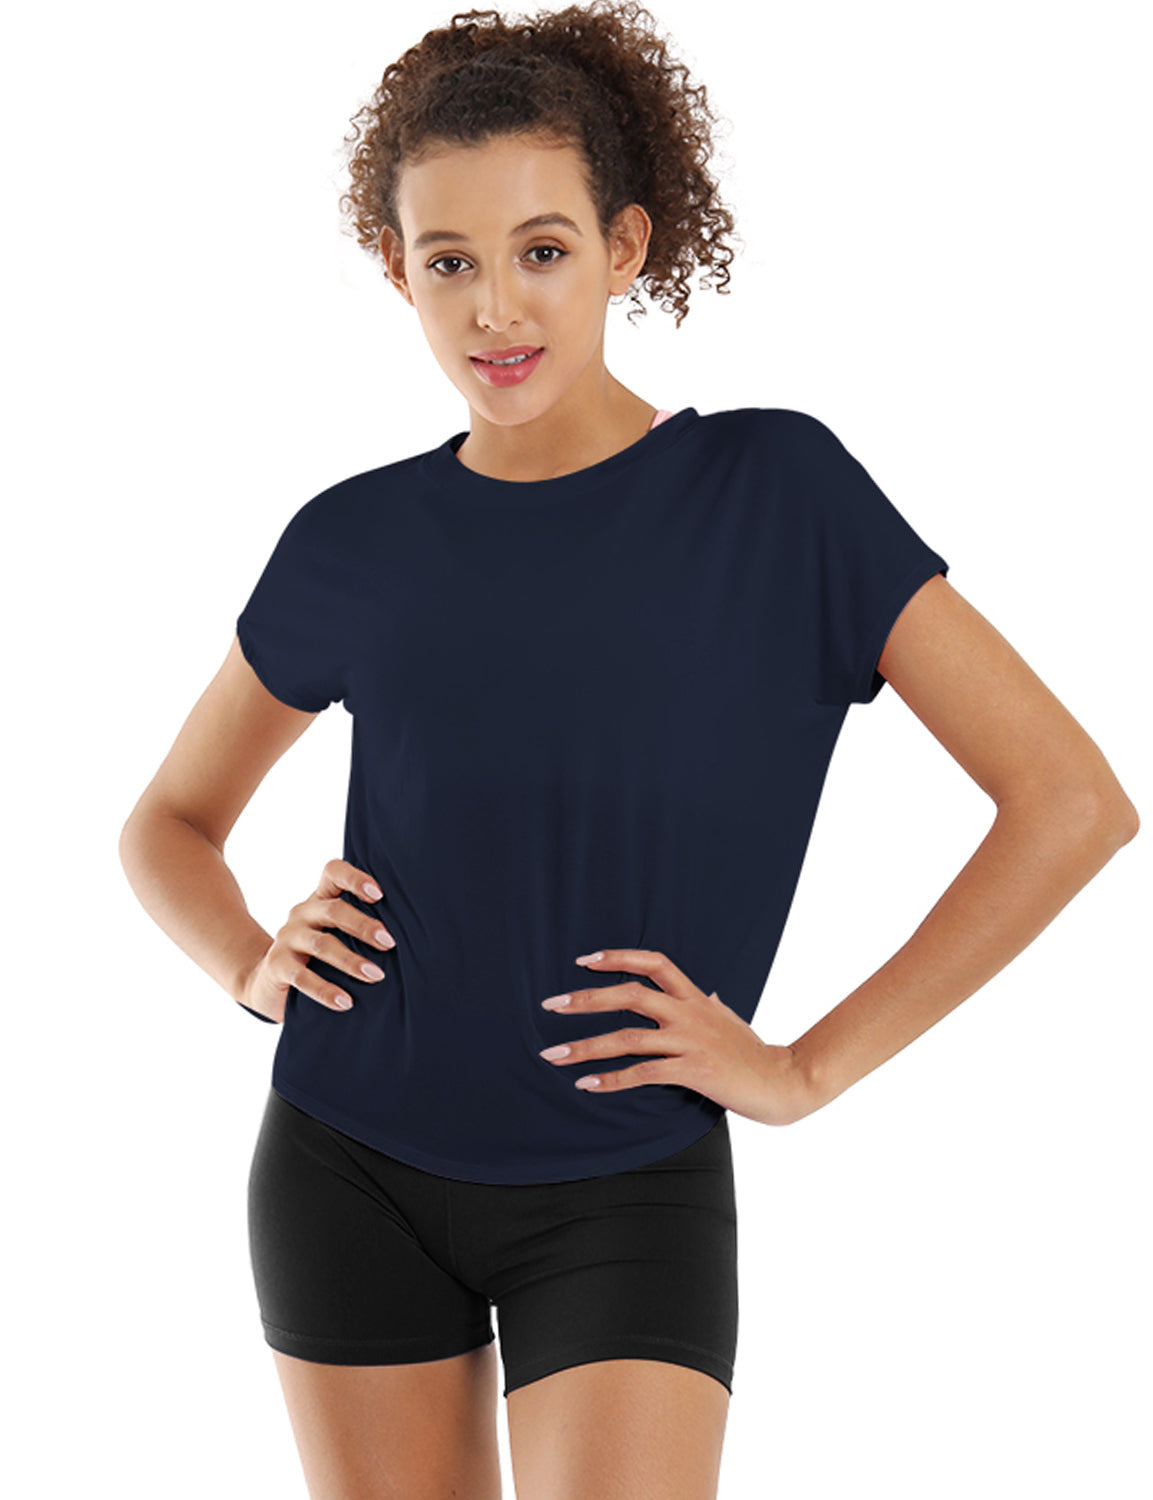 Hip Length Short Sleeve Shirt darknavy 93%Modal/7%Spandex Designed for Pilates Classic Fit, Hip Length An easy fit that floats away from your body Sits below the waistband for moderate, everyday coverage Lightweight, elastic, strong fabric for moisture absorption and perspiration, sports and fitness clothing.